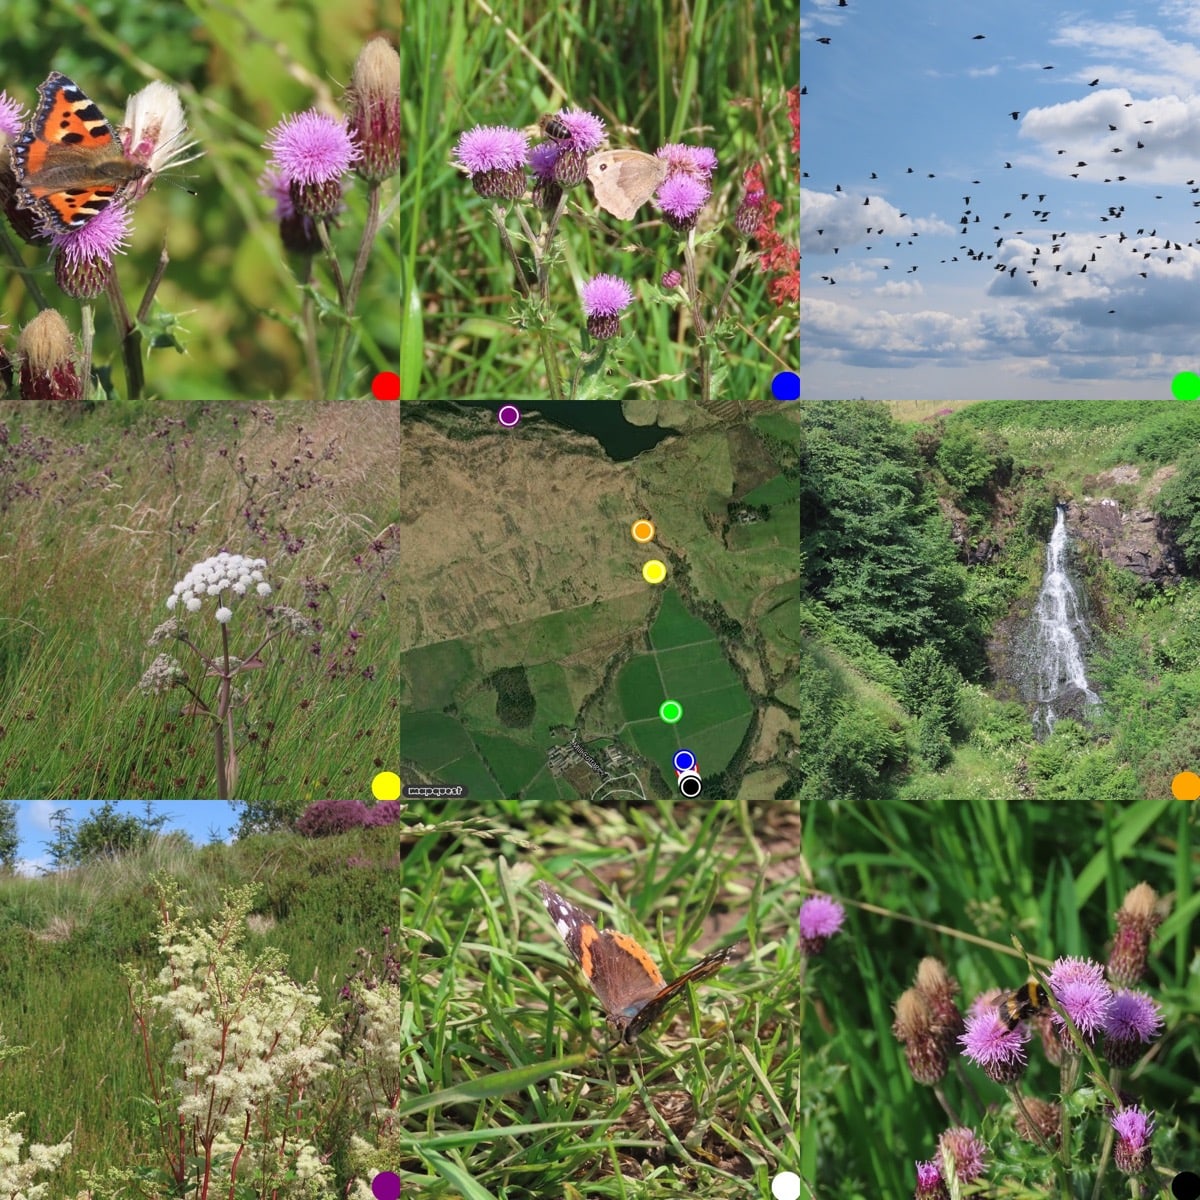 Grid of pictures, the center one a map of where the othere were taken. From Top Left: Tortoise Shell butterfly; Meadow Brown Butterfly; flock of mixed corvids against a blue sky & cumulous clouds; Angelica Flower; map; Grey Mare's Tail waterfall; Meadowsweet flower; Red Admiral Butterfly; Bee on thistle.